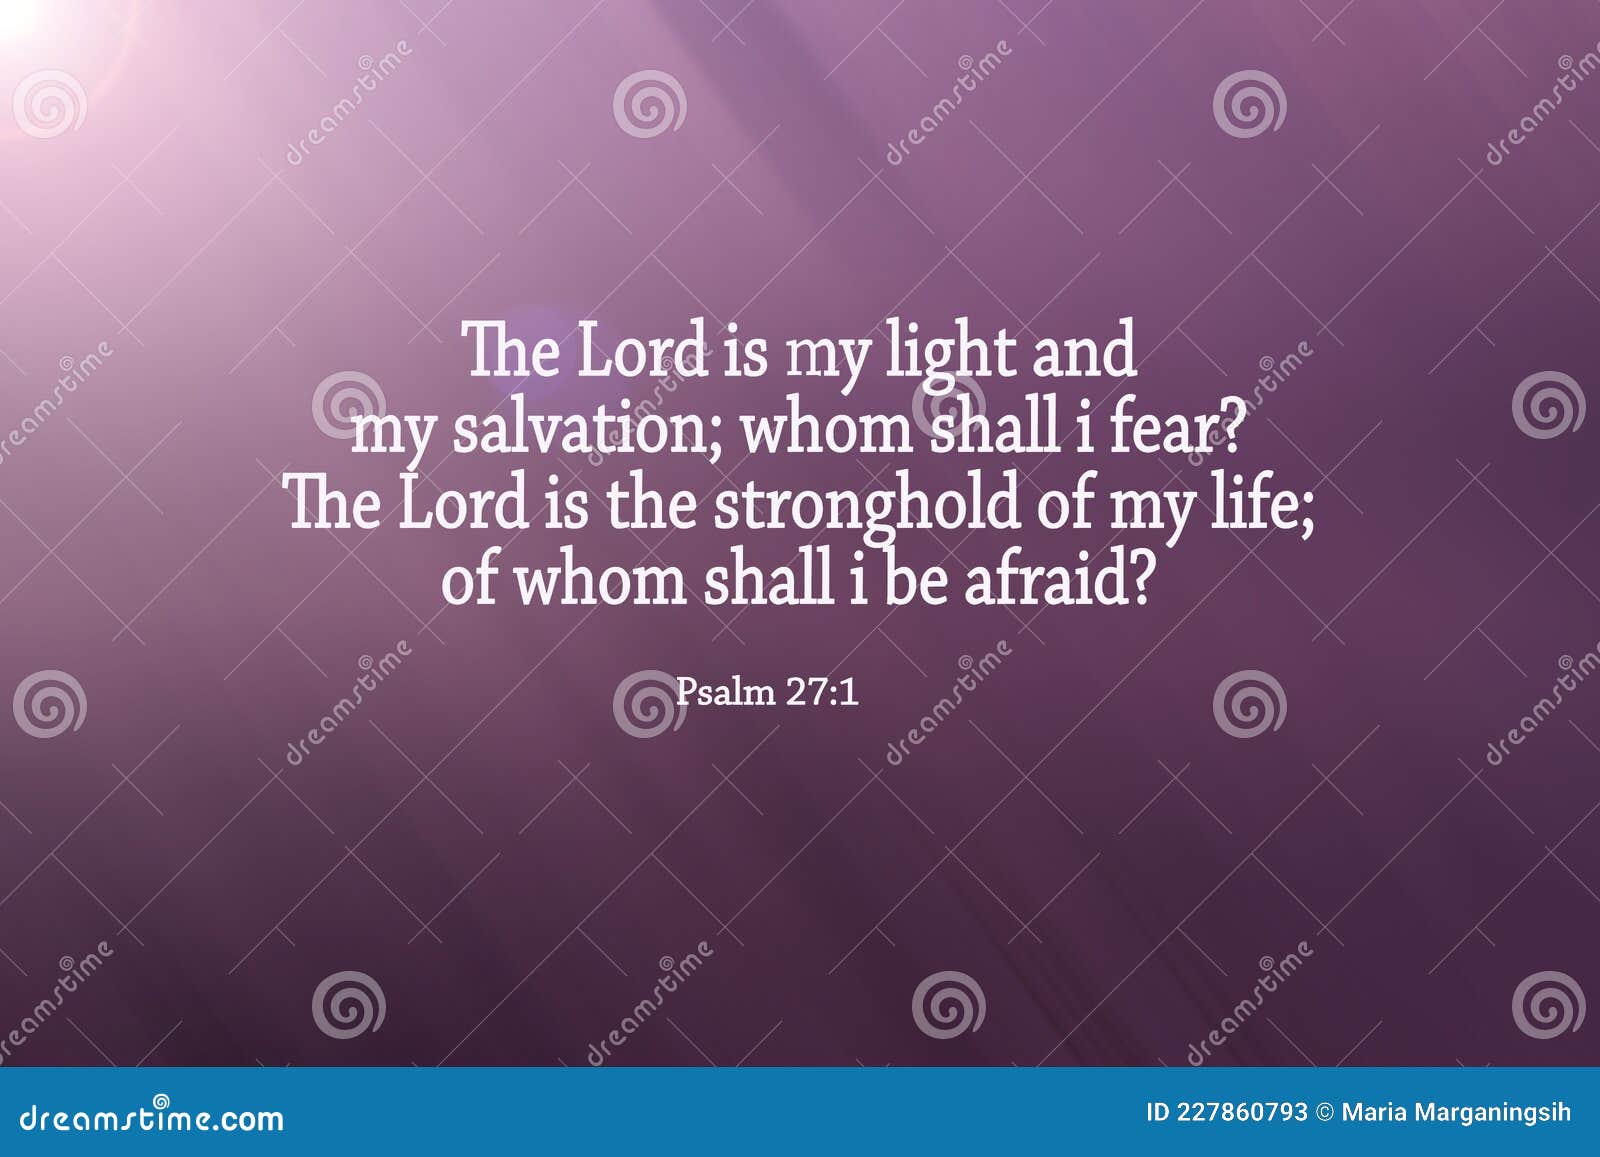 bible verse psalm 27:1 - the lord is my light and my salvation; whom shall i fear? the lord is the stronghold of my life.